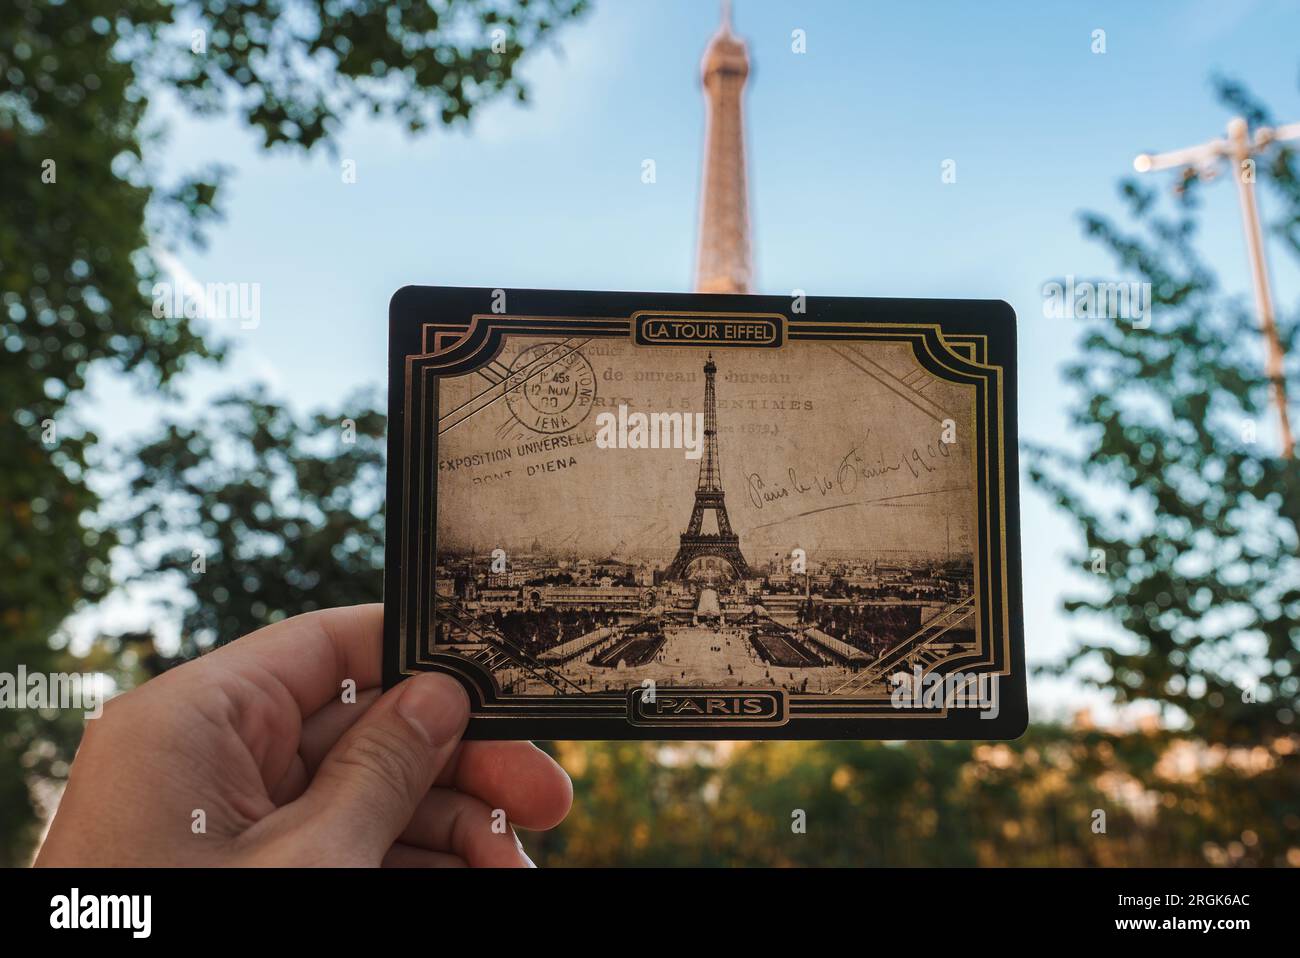 Person Holding Eiffel Tower Photo in Dark Setting Stock Photo